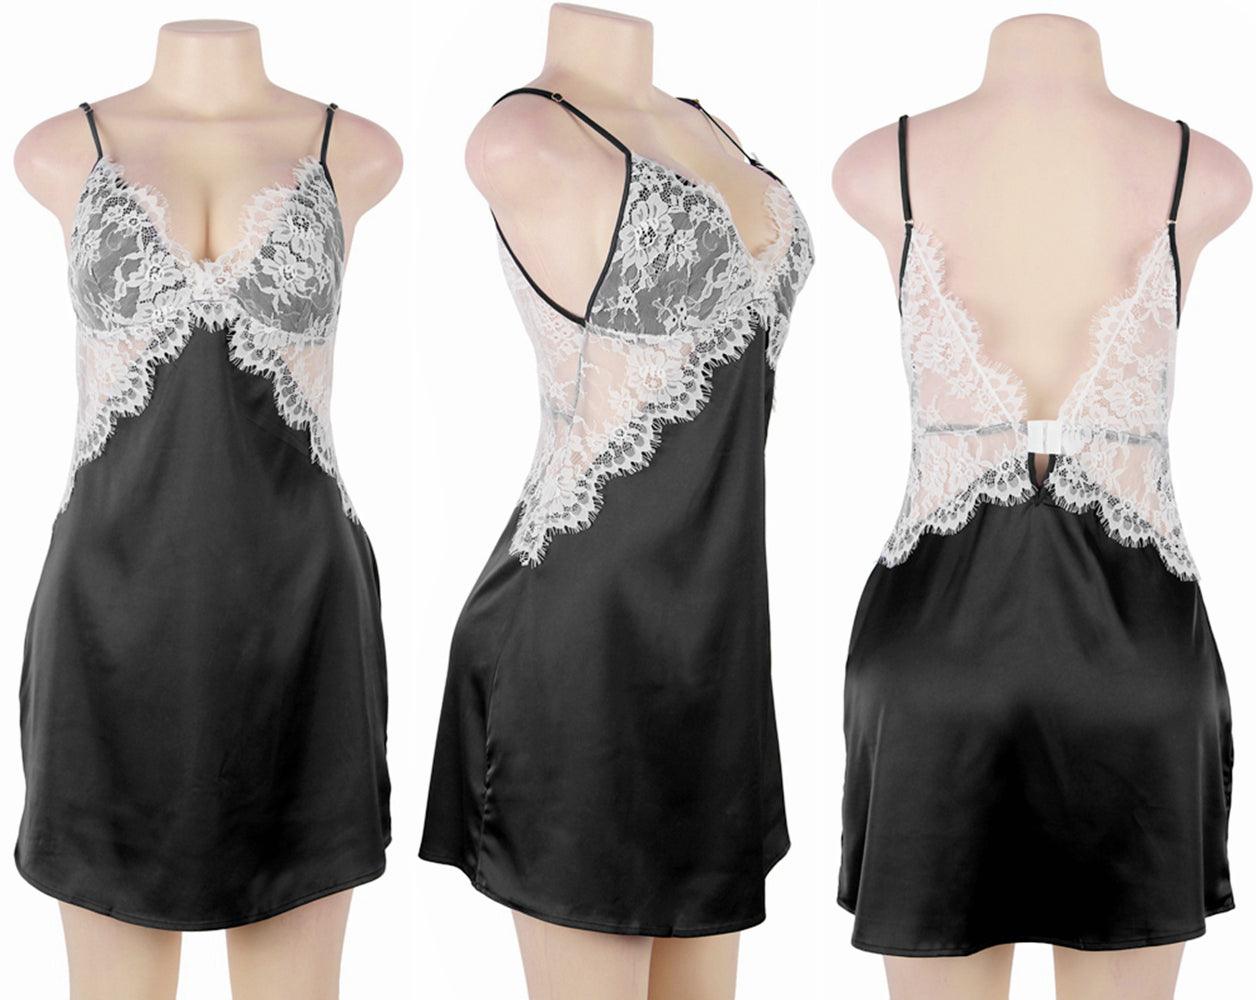 An lace nightgown with an open back design and adjustable straps. The delicate lace detailing and babydoll style provide a feminine and seductive look, while the soft and lightweight fabric ensures comfort and a flattering fit for every body type.